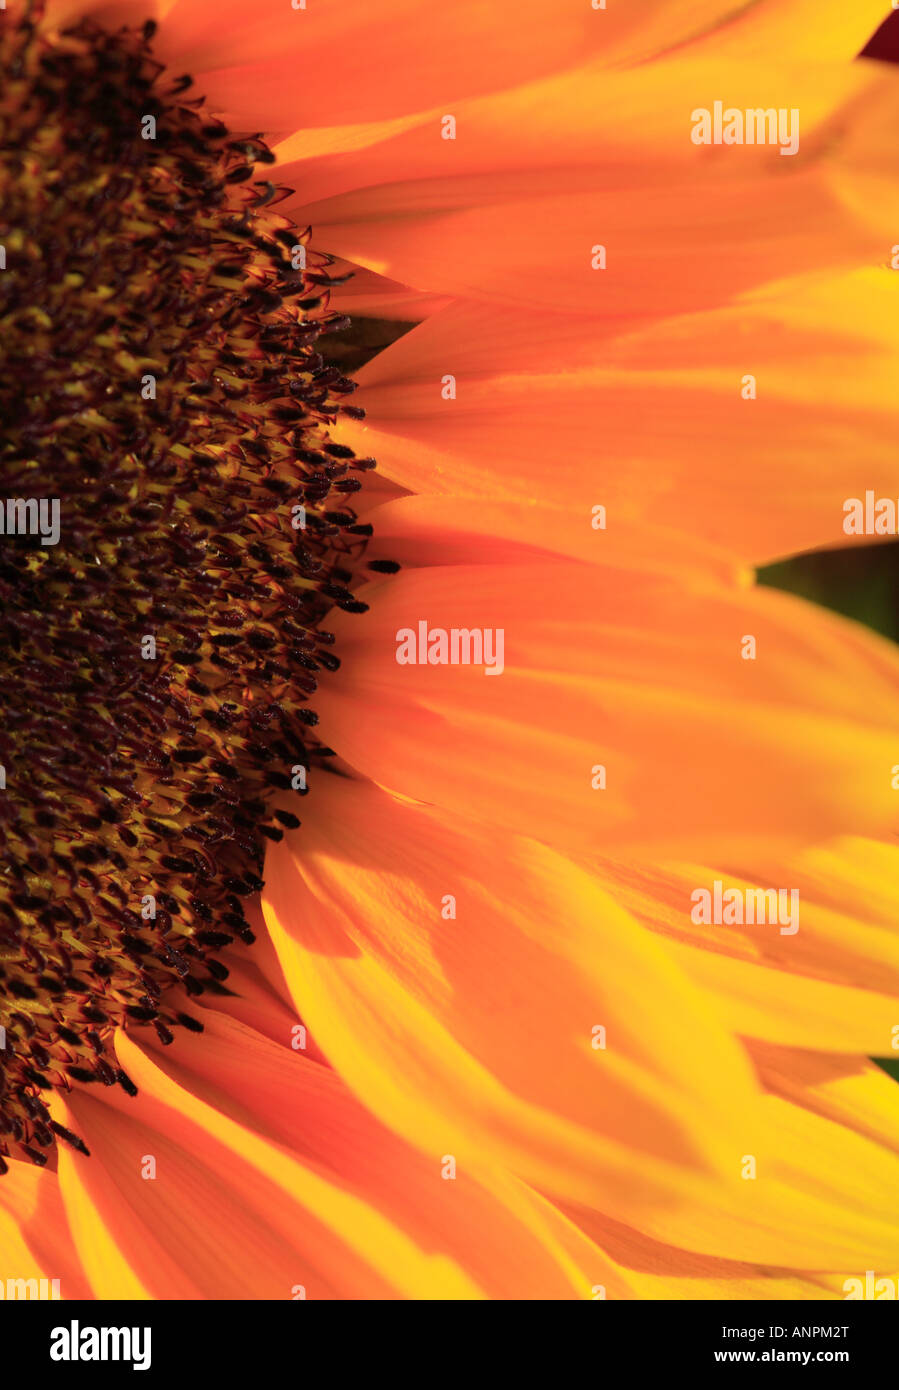 Close up of the florets and petals of a yellow sunflower Stock Photo